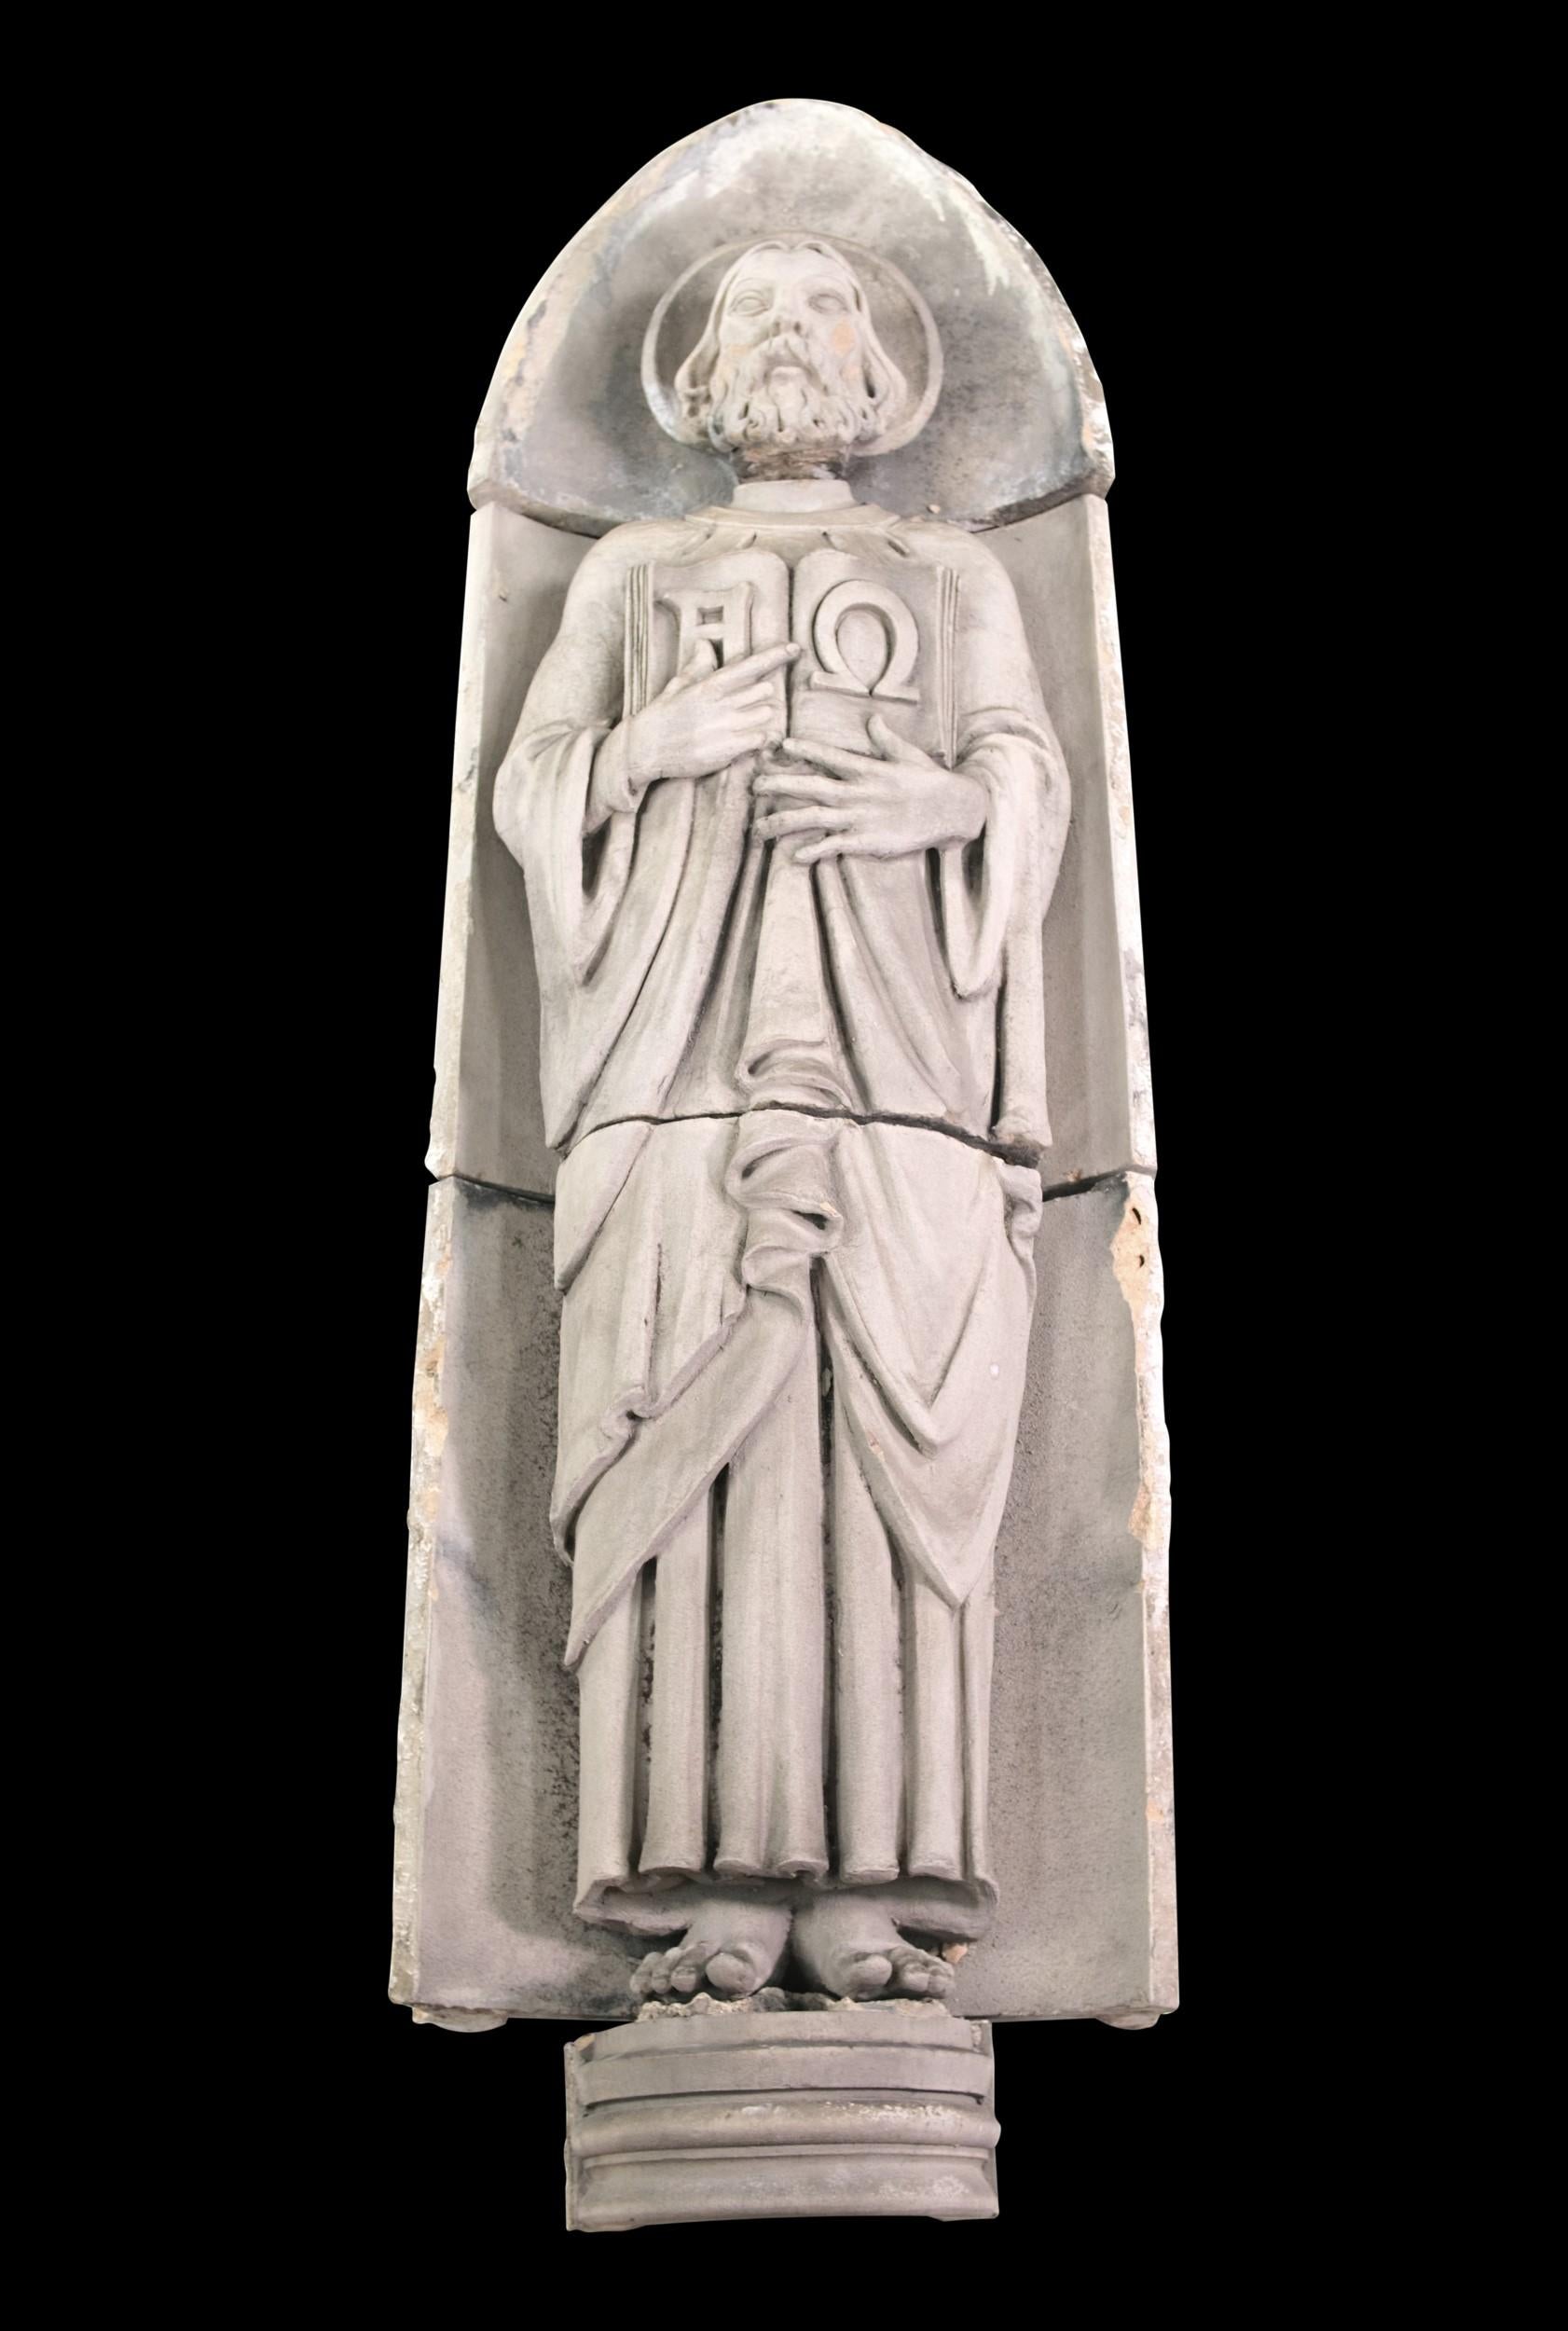 This Art Deco terracotta statue of Christ was reclaimed from the Calvary Baptist Church which was built in 1929 standing at 123 West 57th Street, where Carnegie Hall resides just across the street. The statue is original to when the church was built